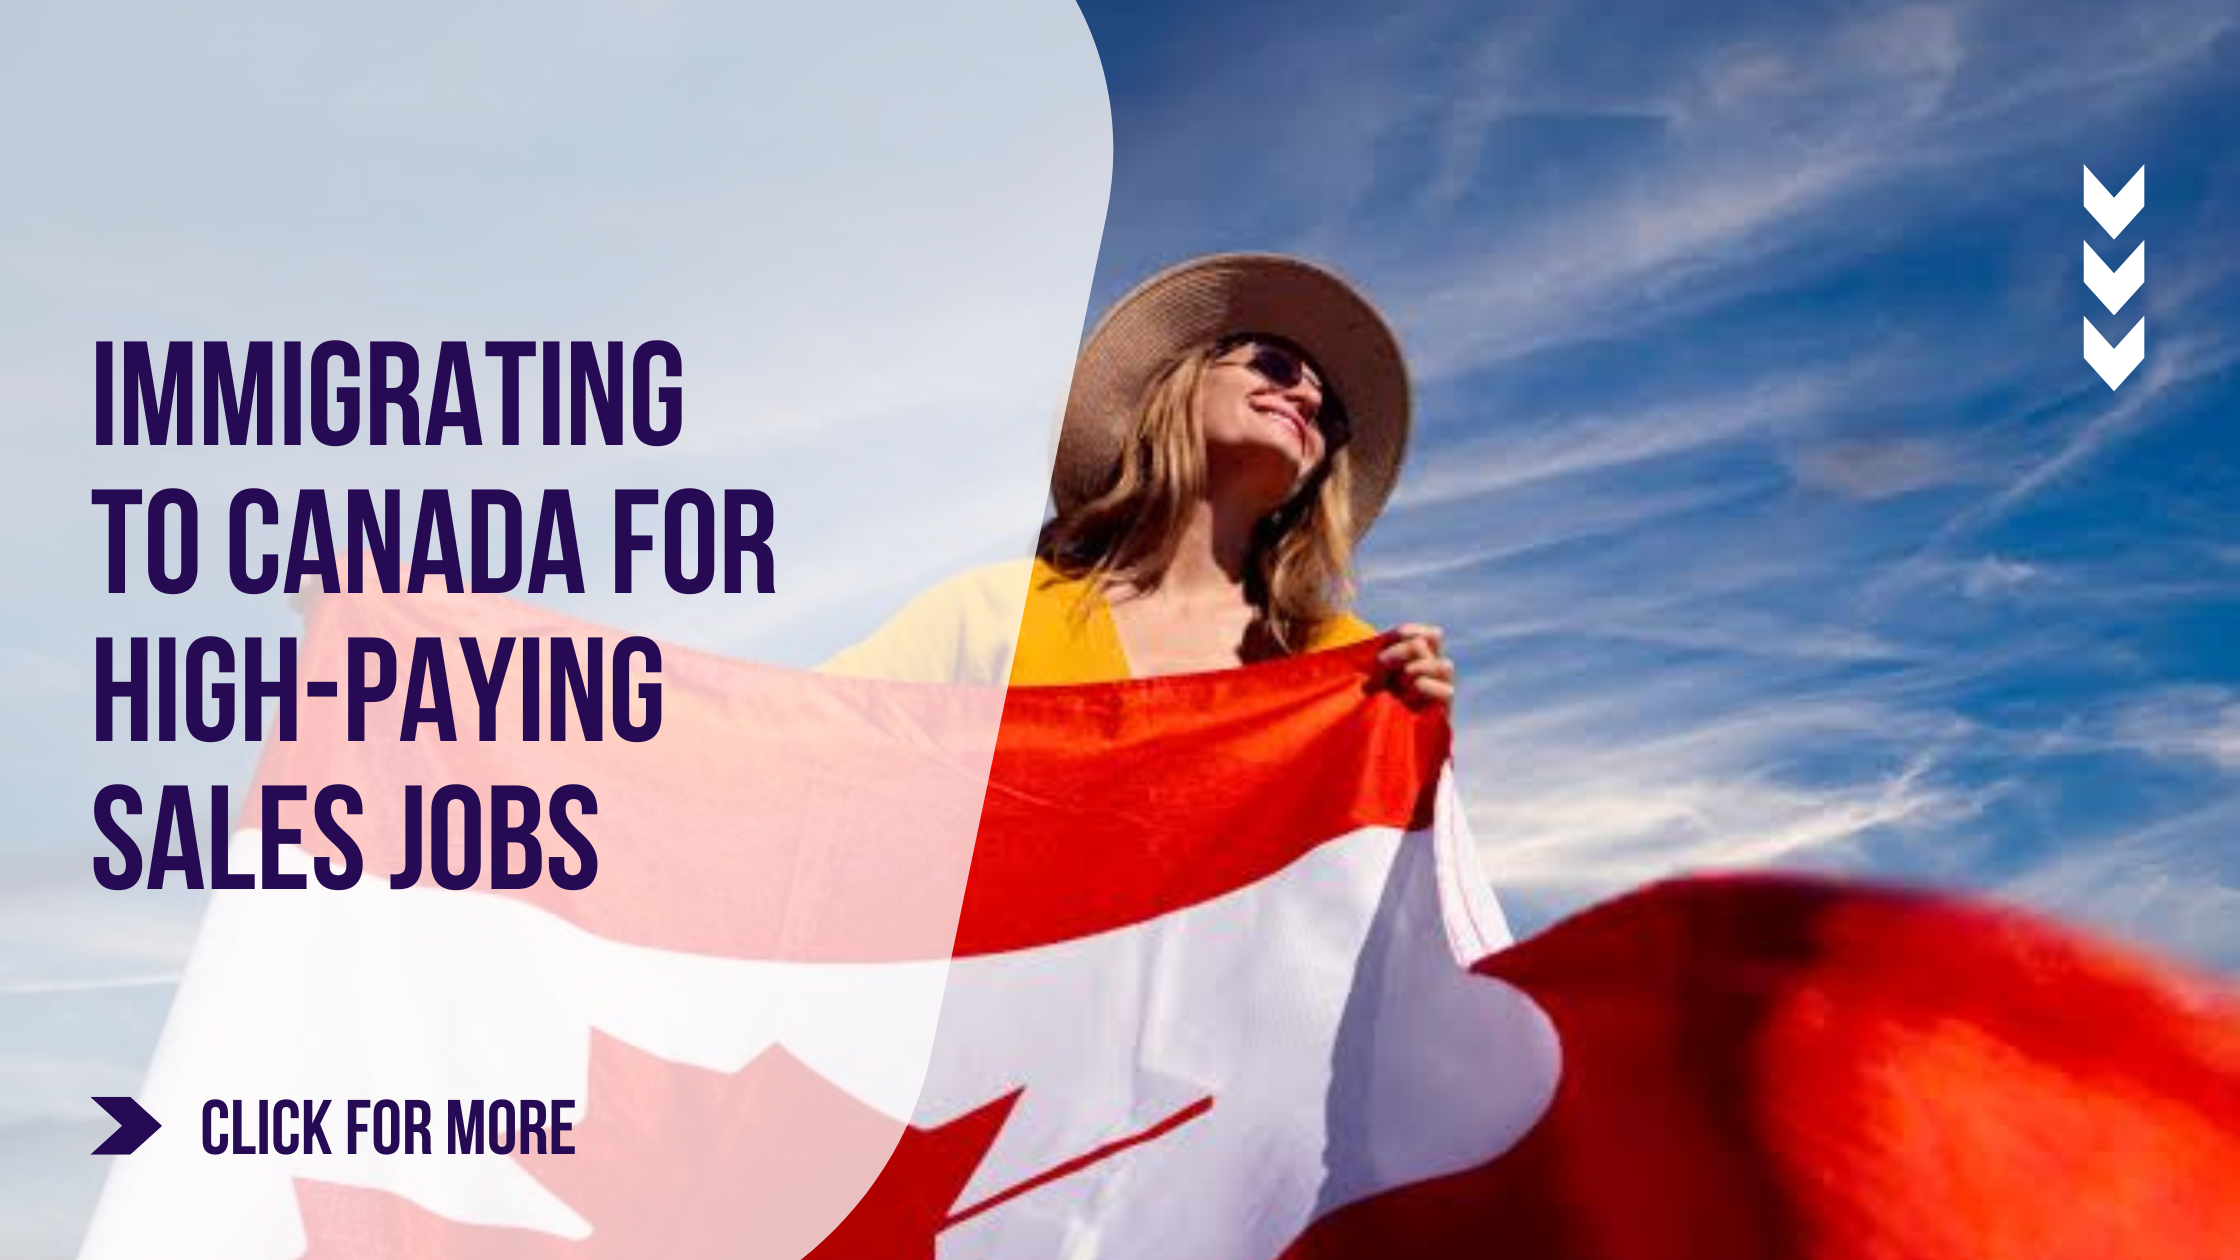 Why Immigrating to Canada for High-Paying Sales Jobs is a Smart Move